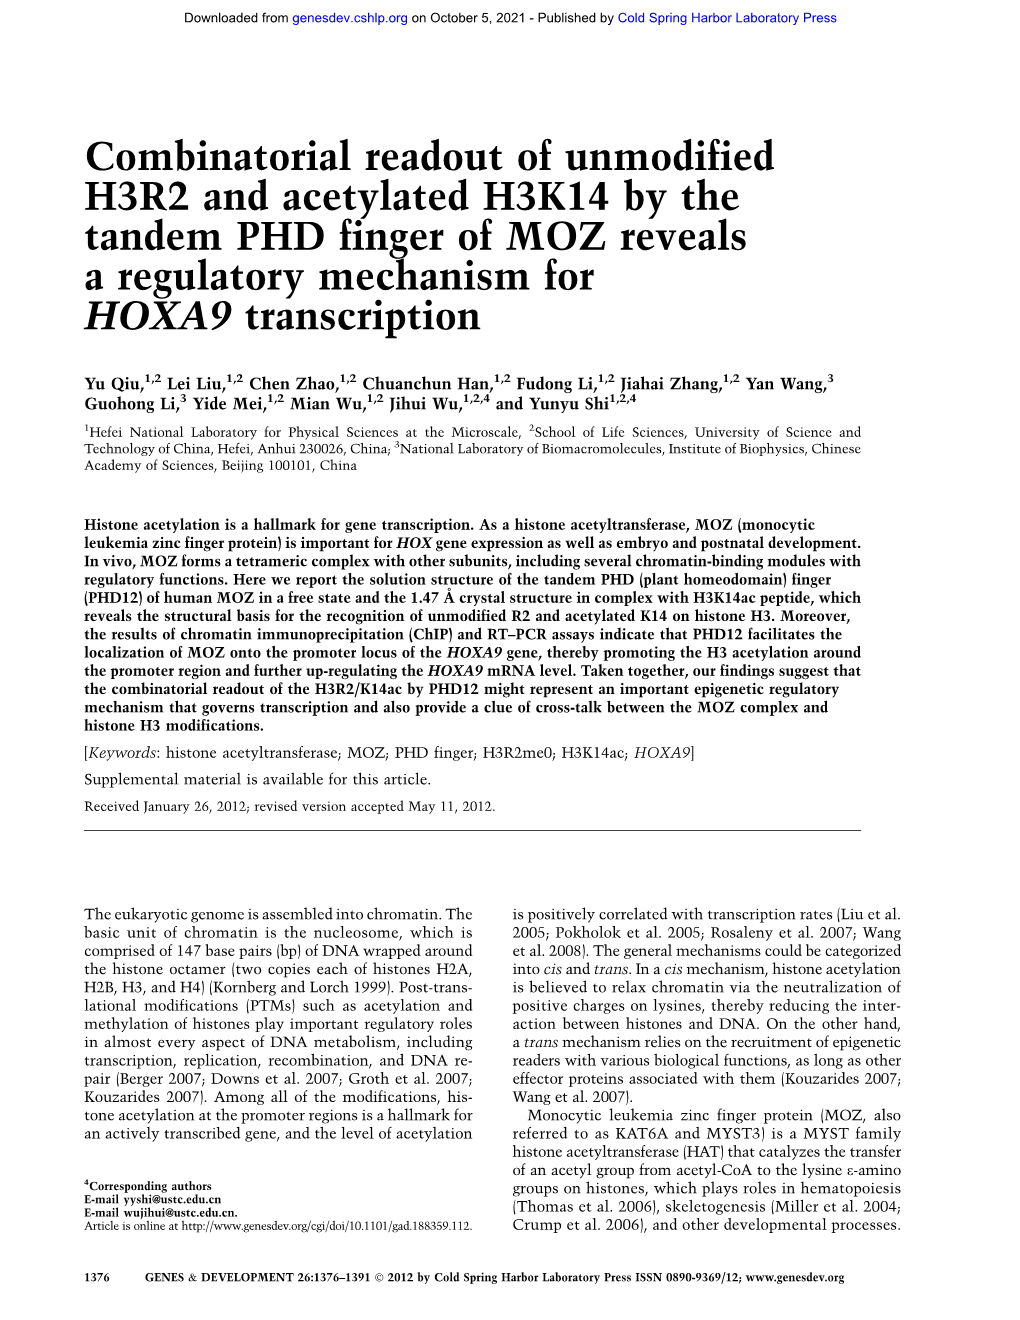 Combinatorial Readout of Unmodified H3R2 and Acetylated H3K14 by the Tandem PHD Finger of MOZ Reveals a Regulatory Mechanism for HOXA9 Transcription